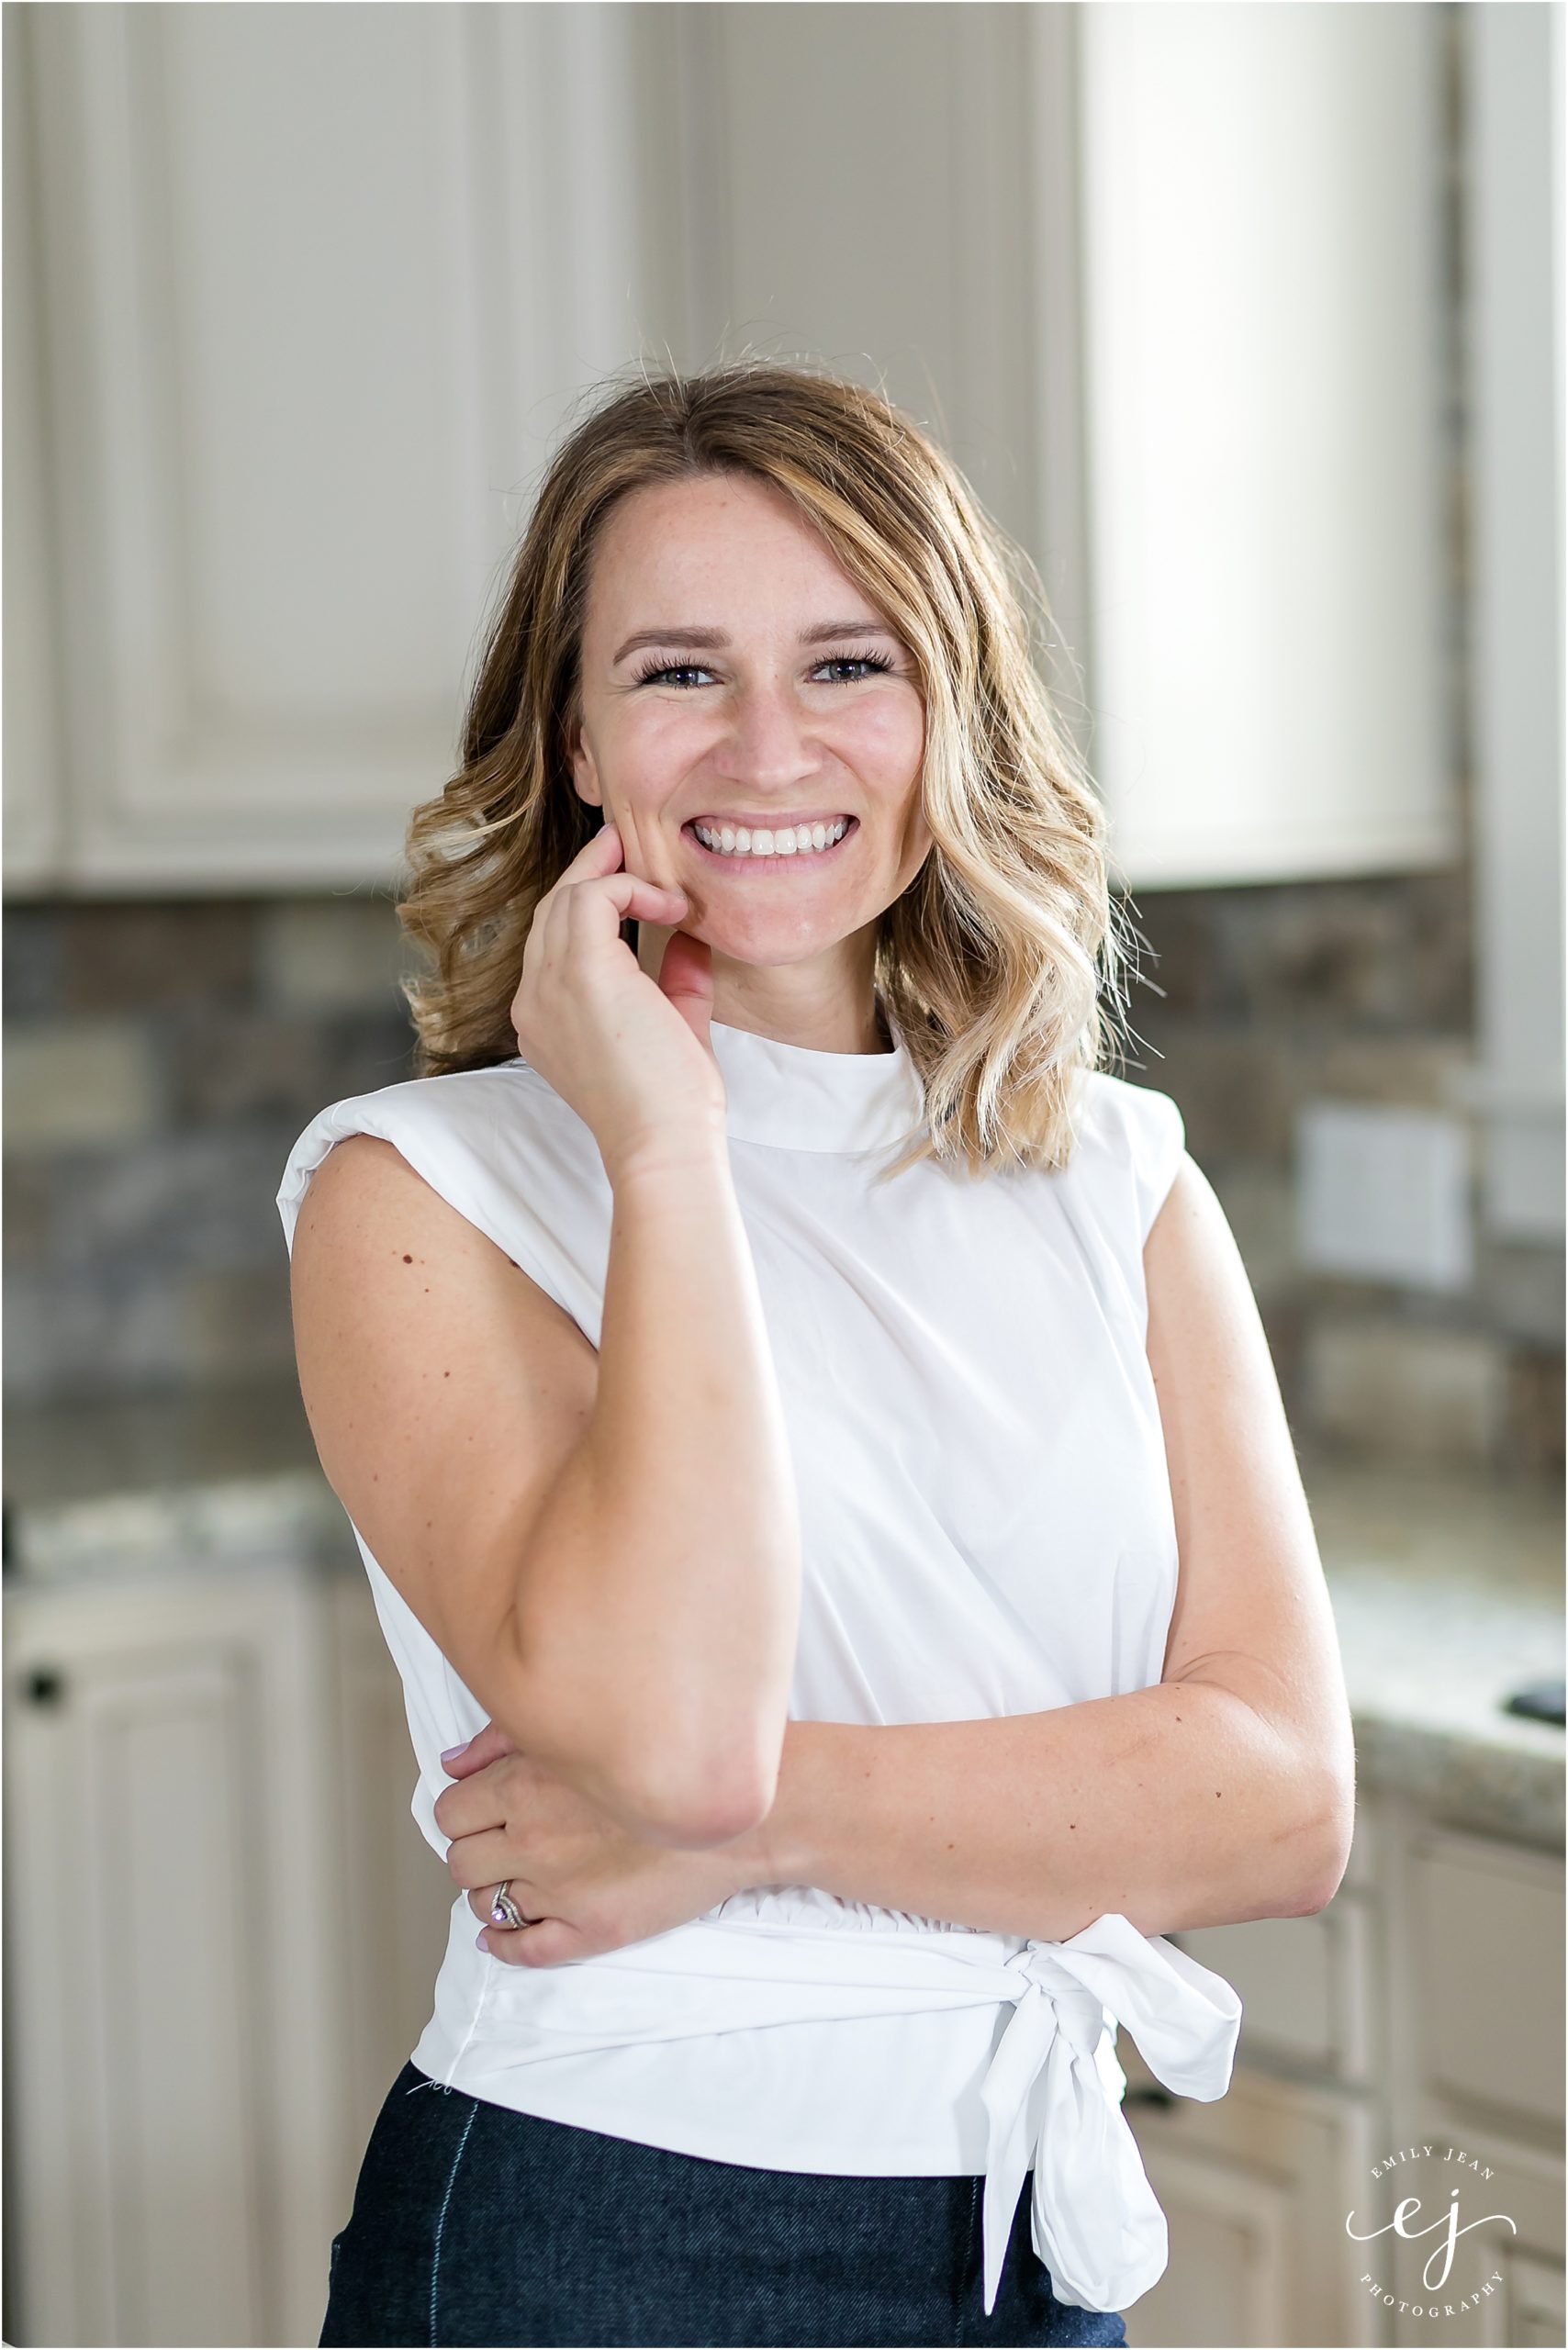 Young real estate agent headshot standing in kitchen branding photo